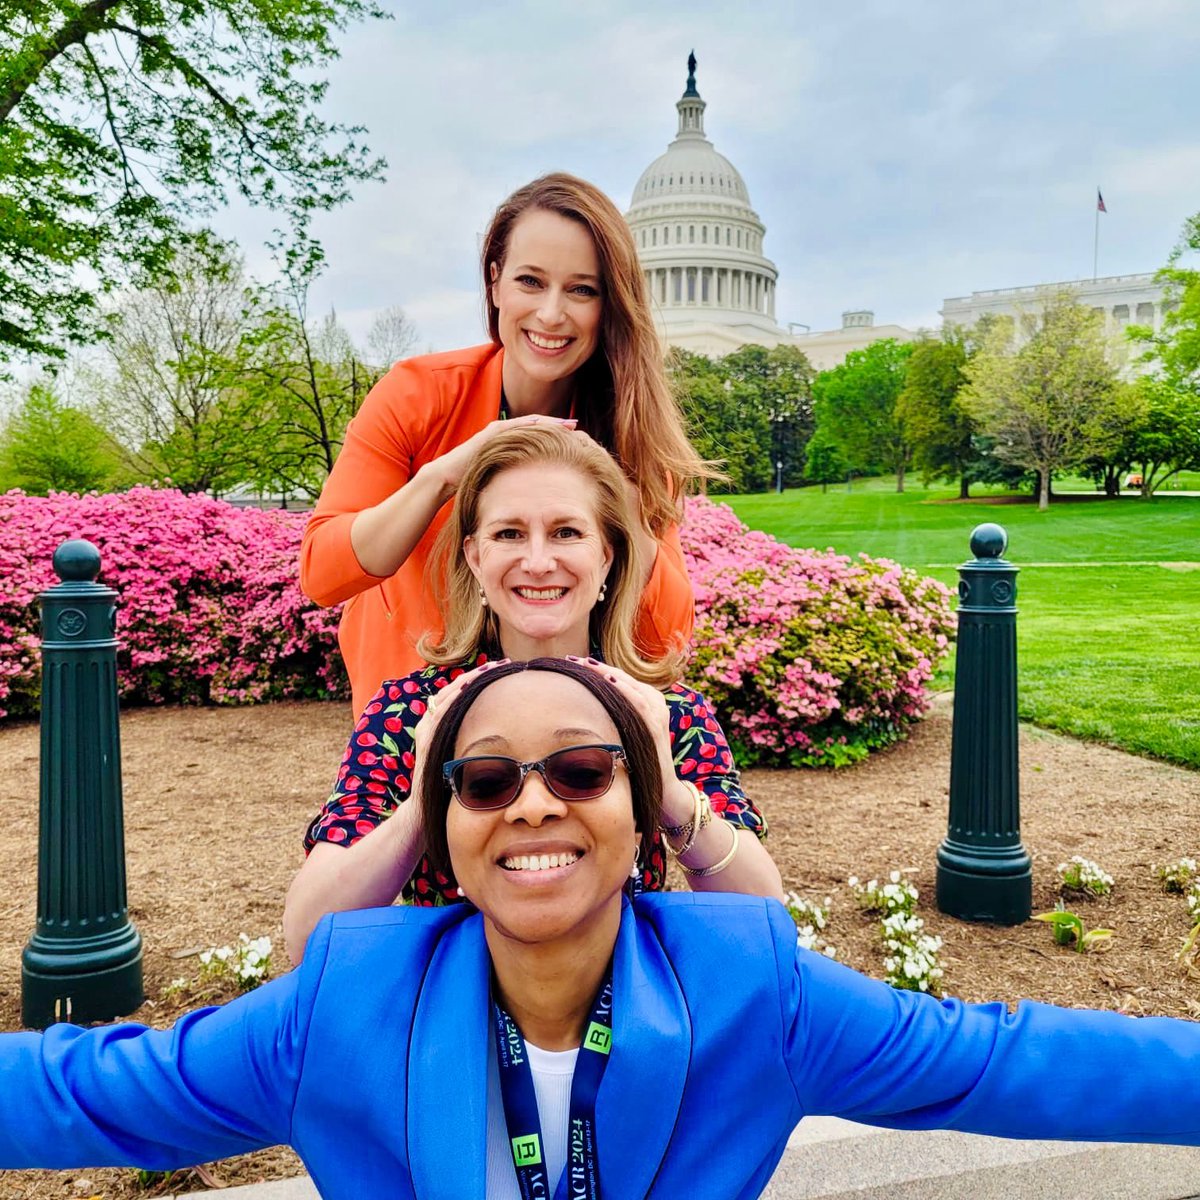 For many women, the toughest voice to elevate is their own. 

Today, we elevated our voices as women in radiology. The future of radvocacy is looking bright 🌷

@ACRRAN #ACRHillDay24